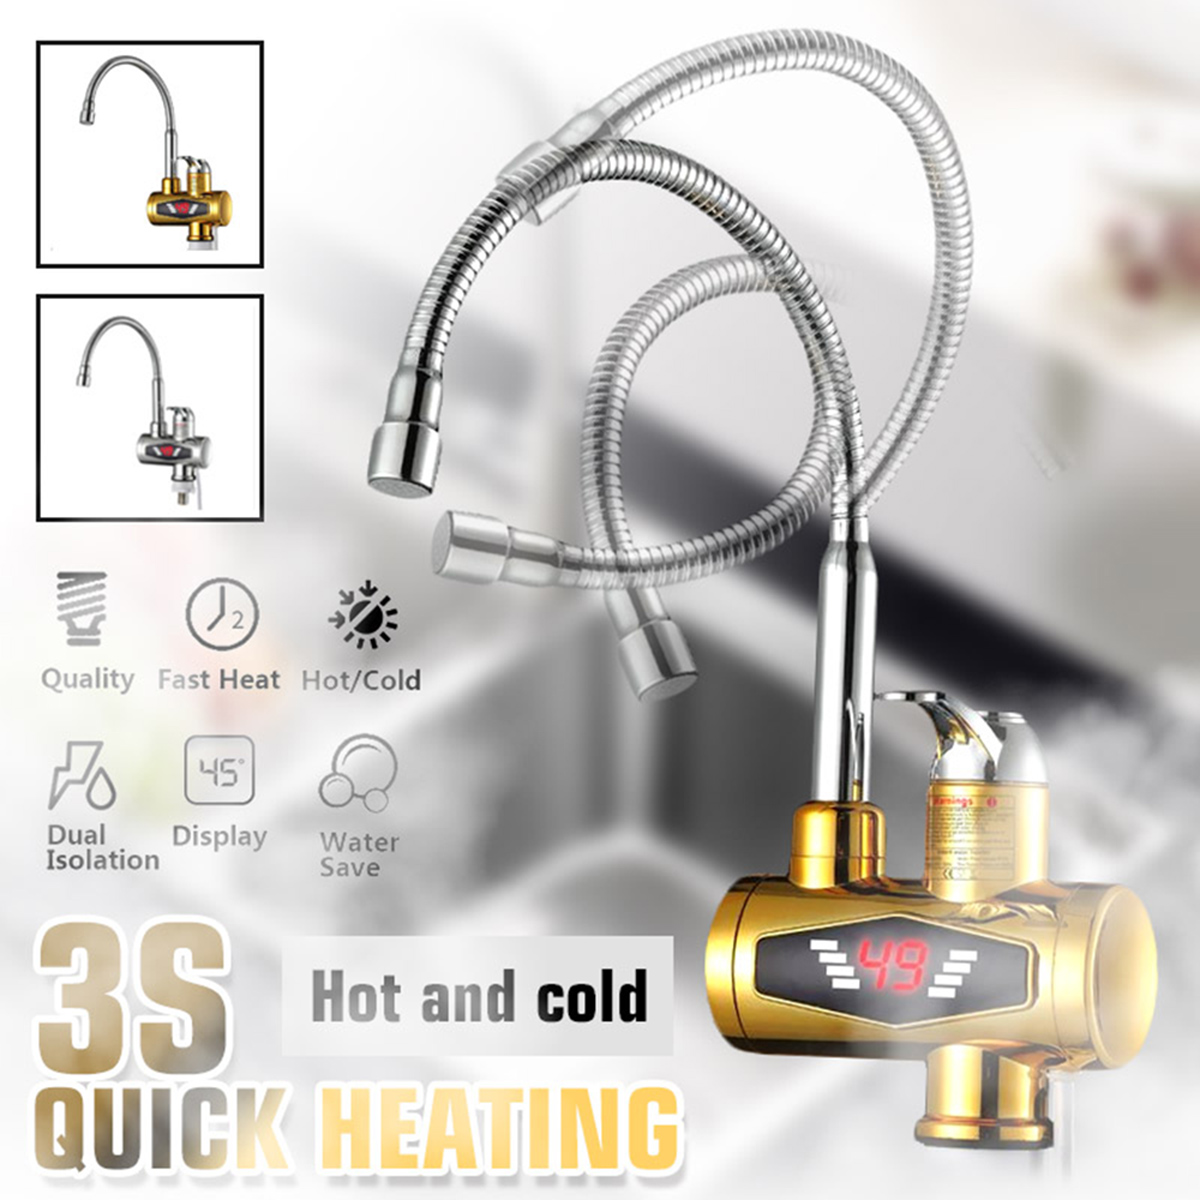 

3000W 220V Temperature Instant Heater Faucet Tap Display Hot Water Heater